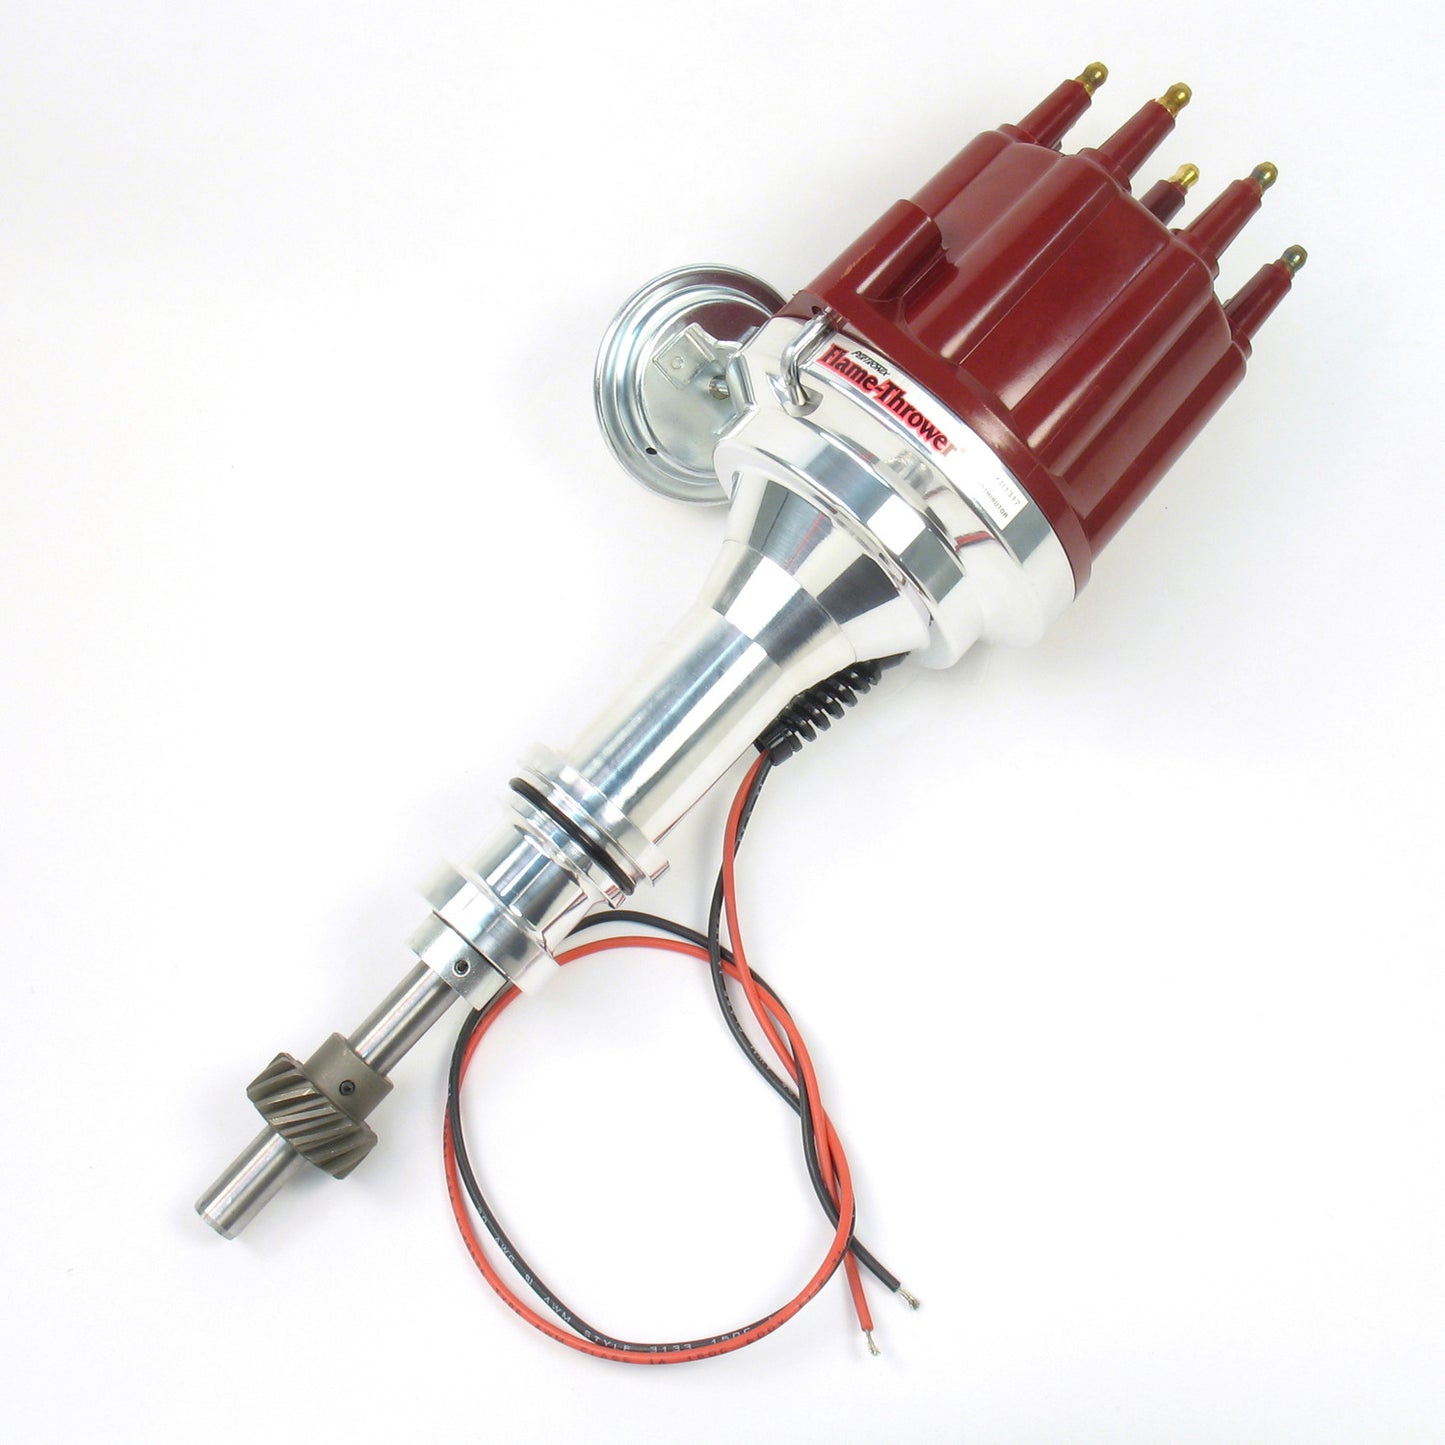 PerTronix D7131711 Flame-Thrower Electronic Distributor Billet Ford 351W with Ignitor III Vacuum Advance Red Male Cap